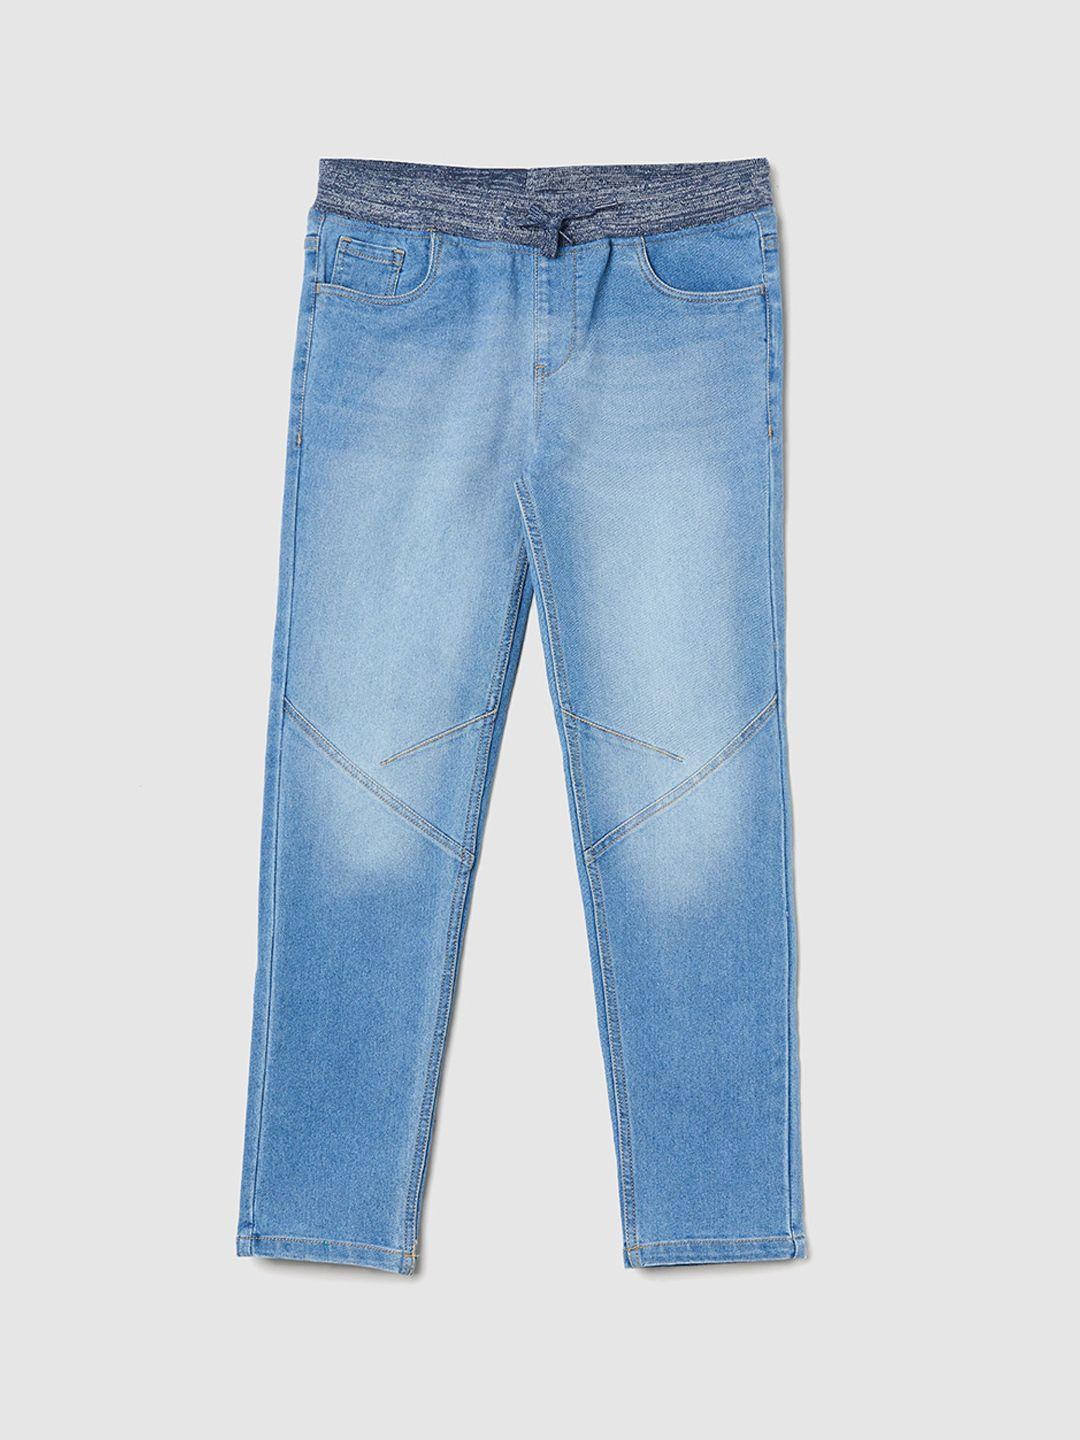 max Boys Mid-Rise Light Fade Jeans